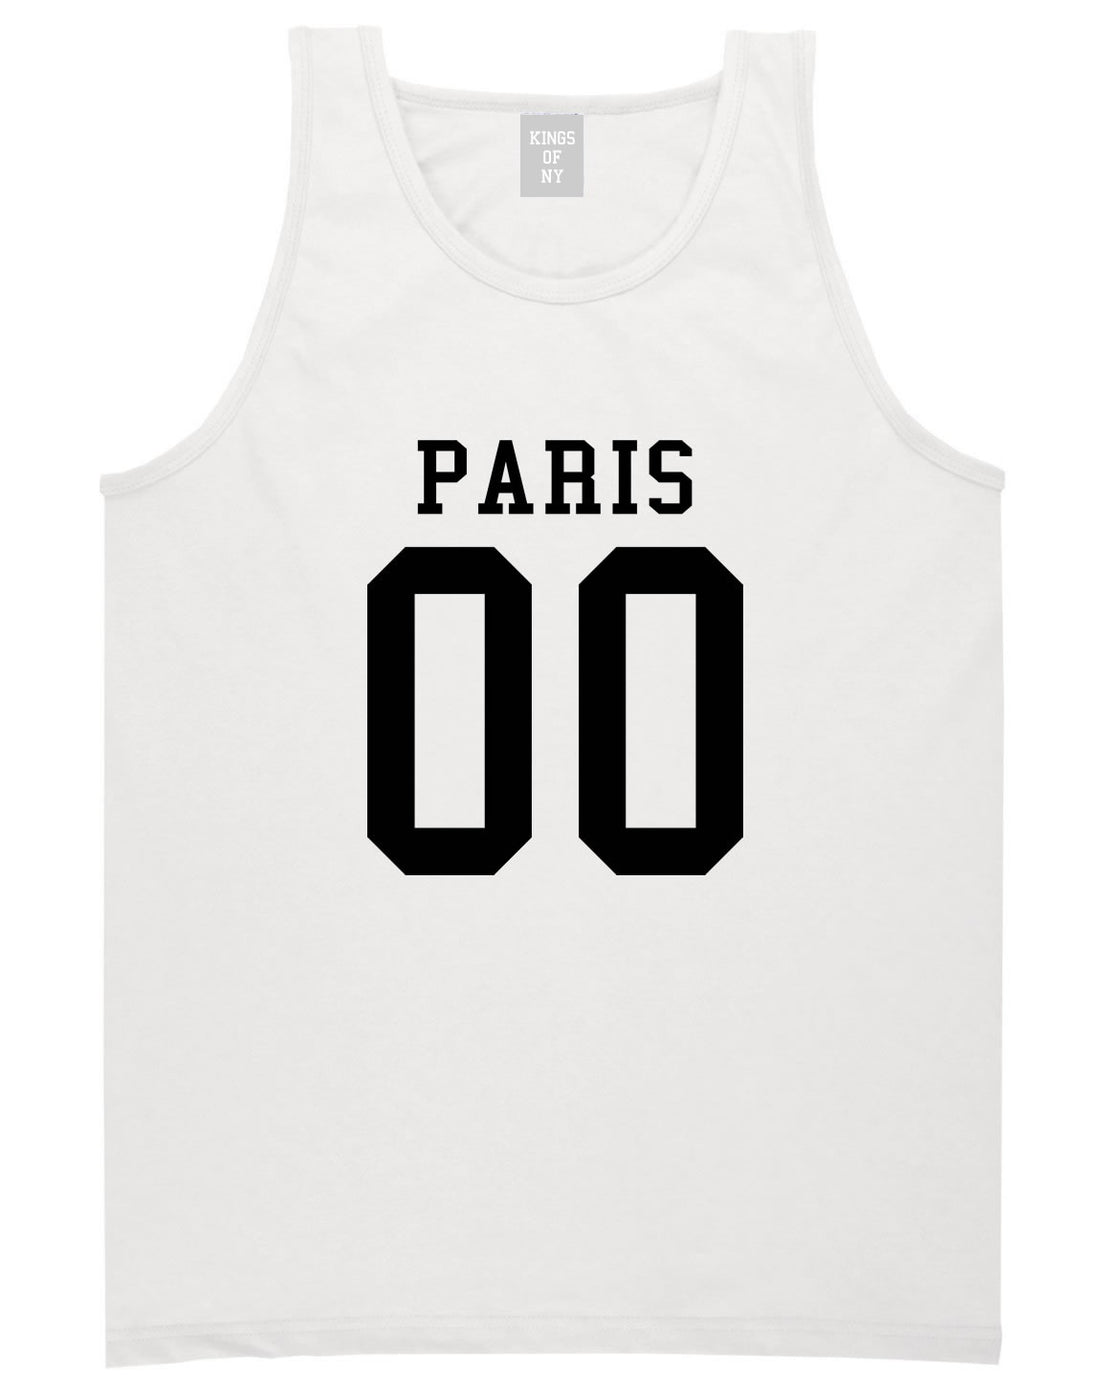 Paris Team 00 Jersey Tank Top in White By Kings Of NY